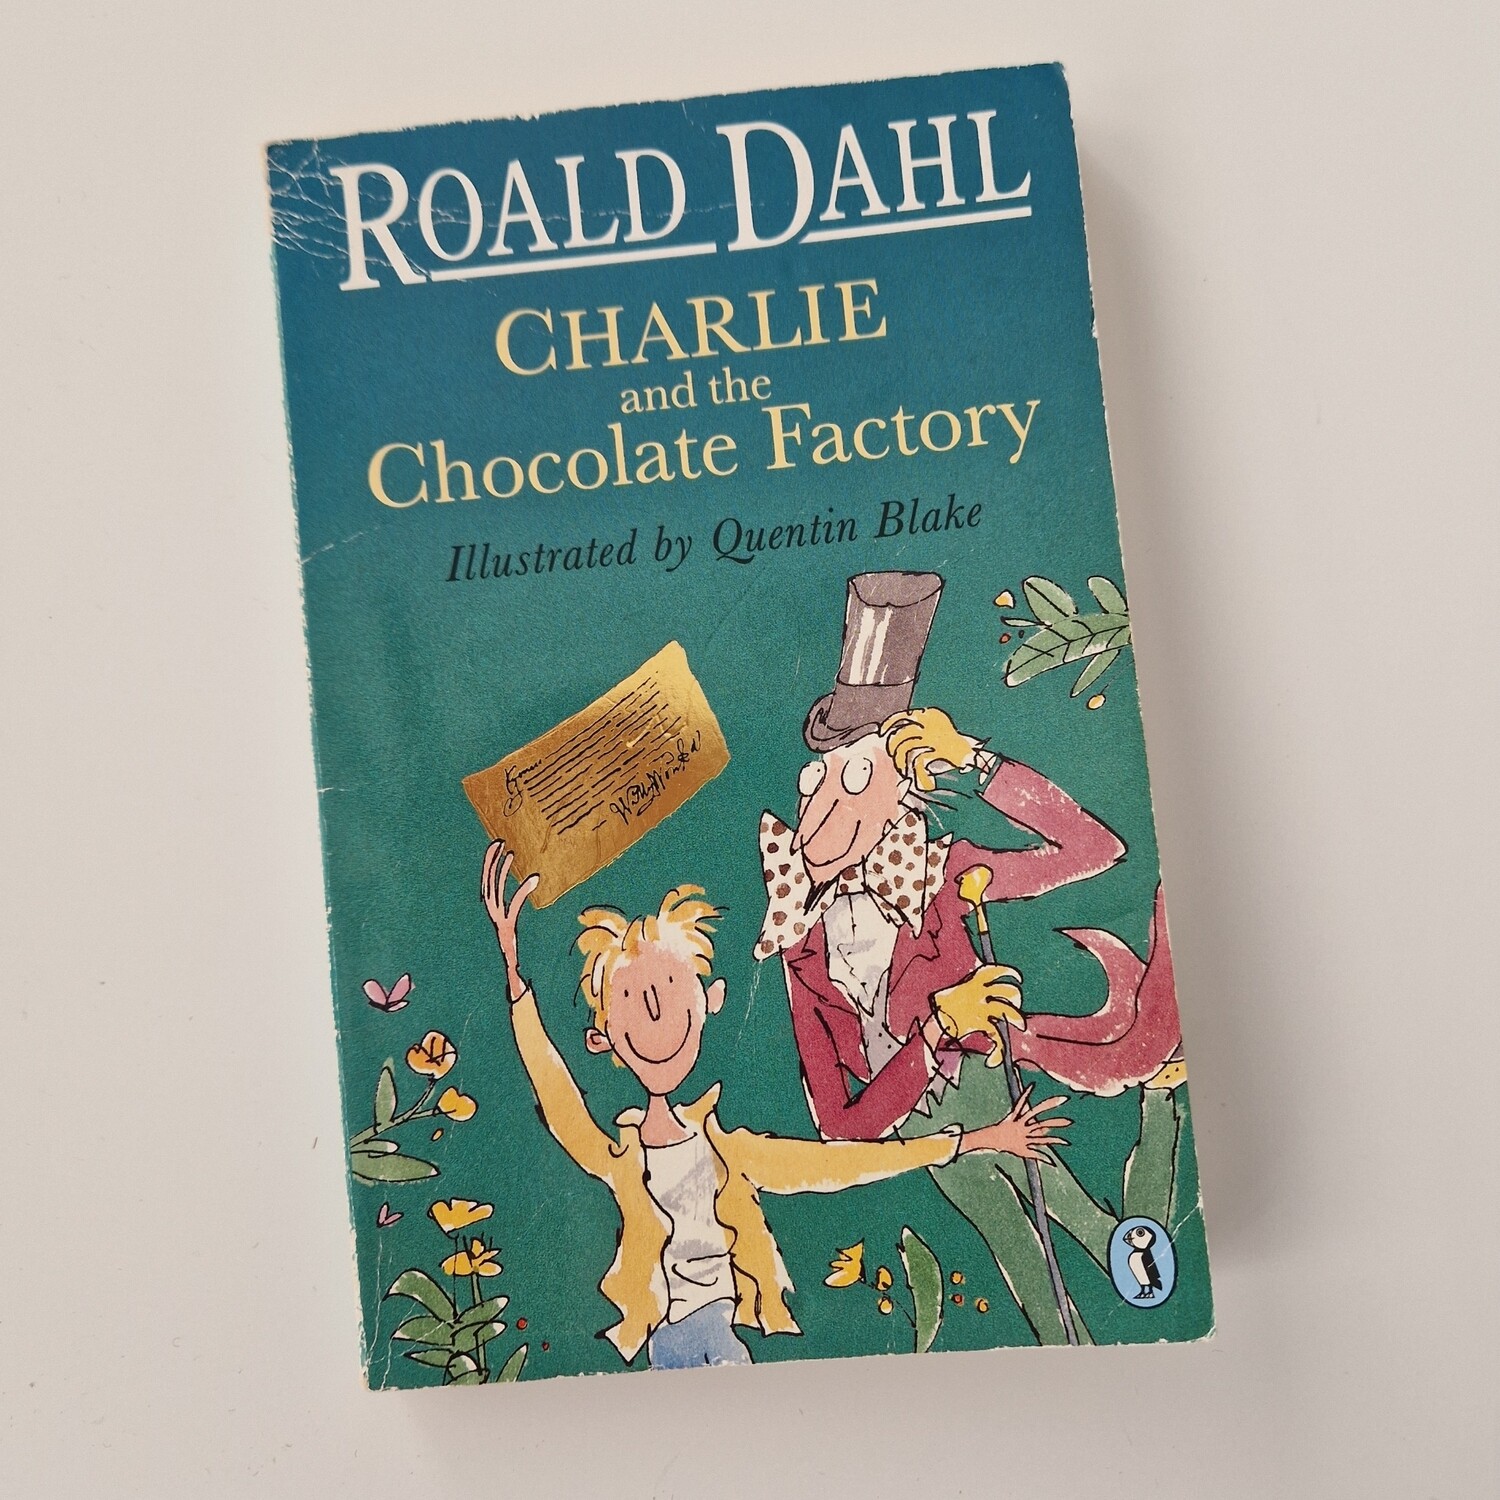 Roald Dahl Charlie and the Chocolate Factory Notebook- made from a paperback book